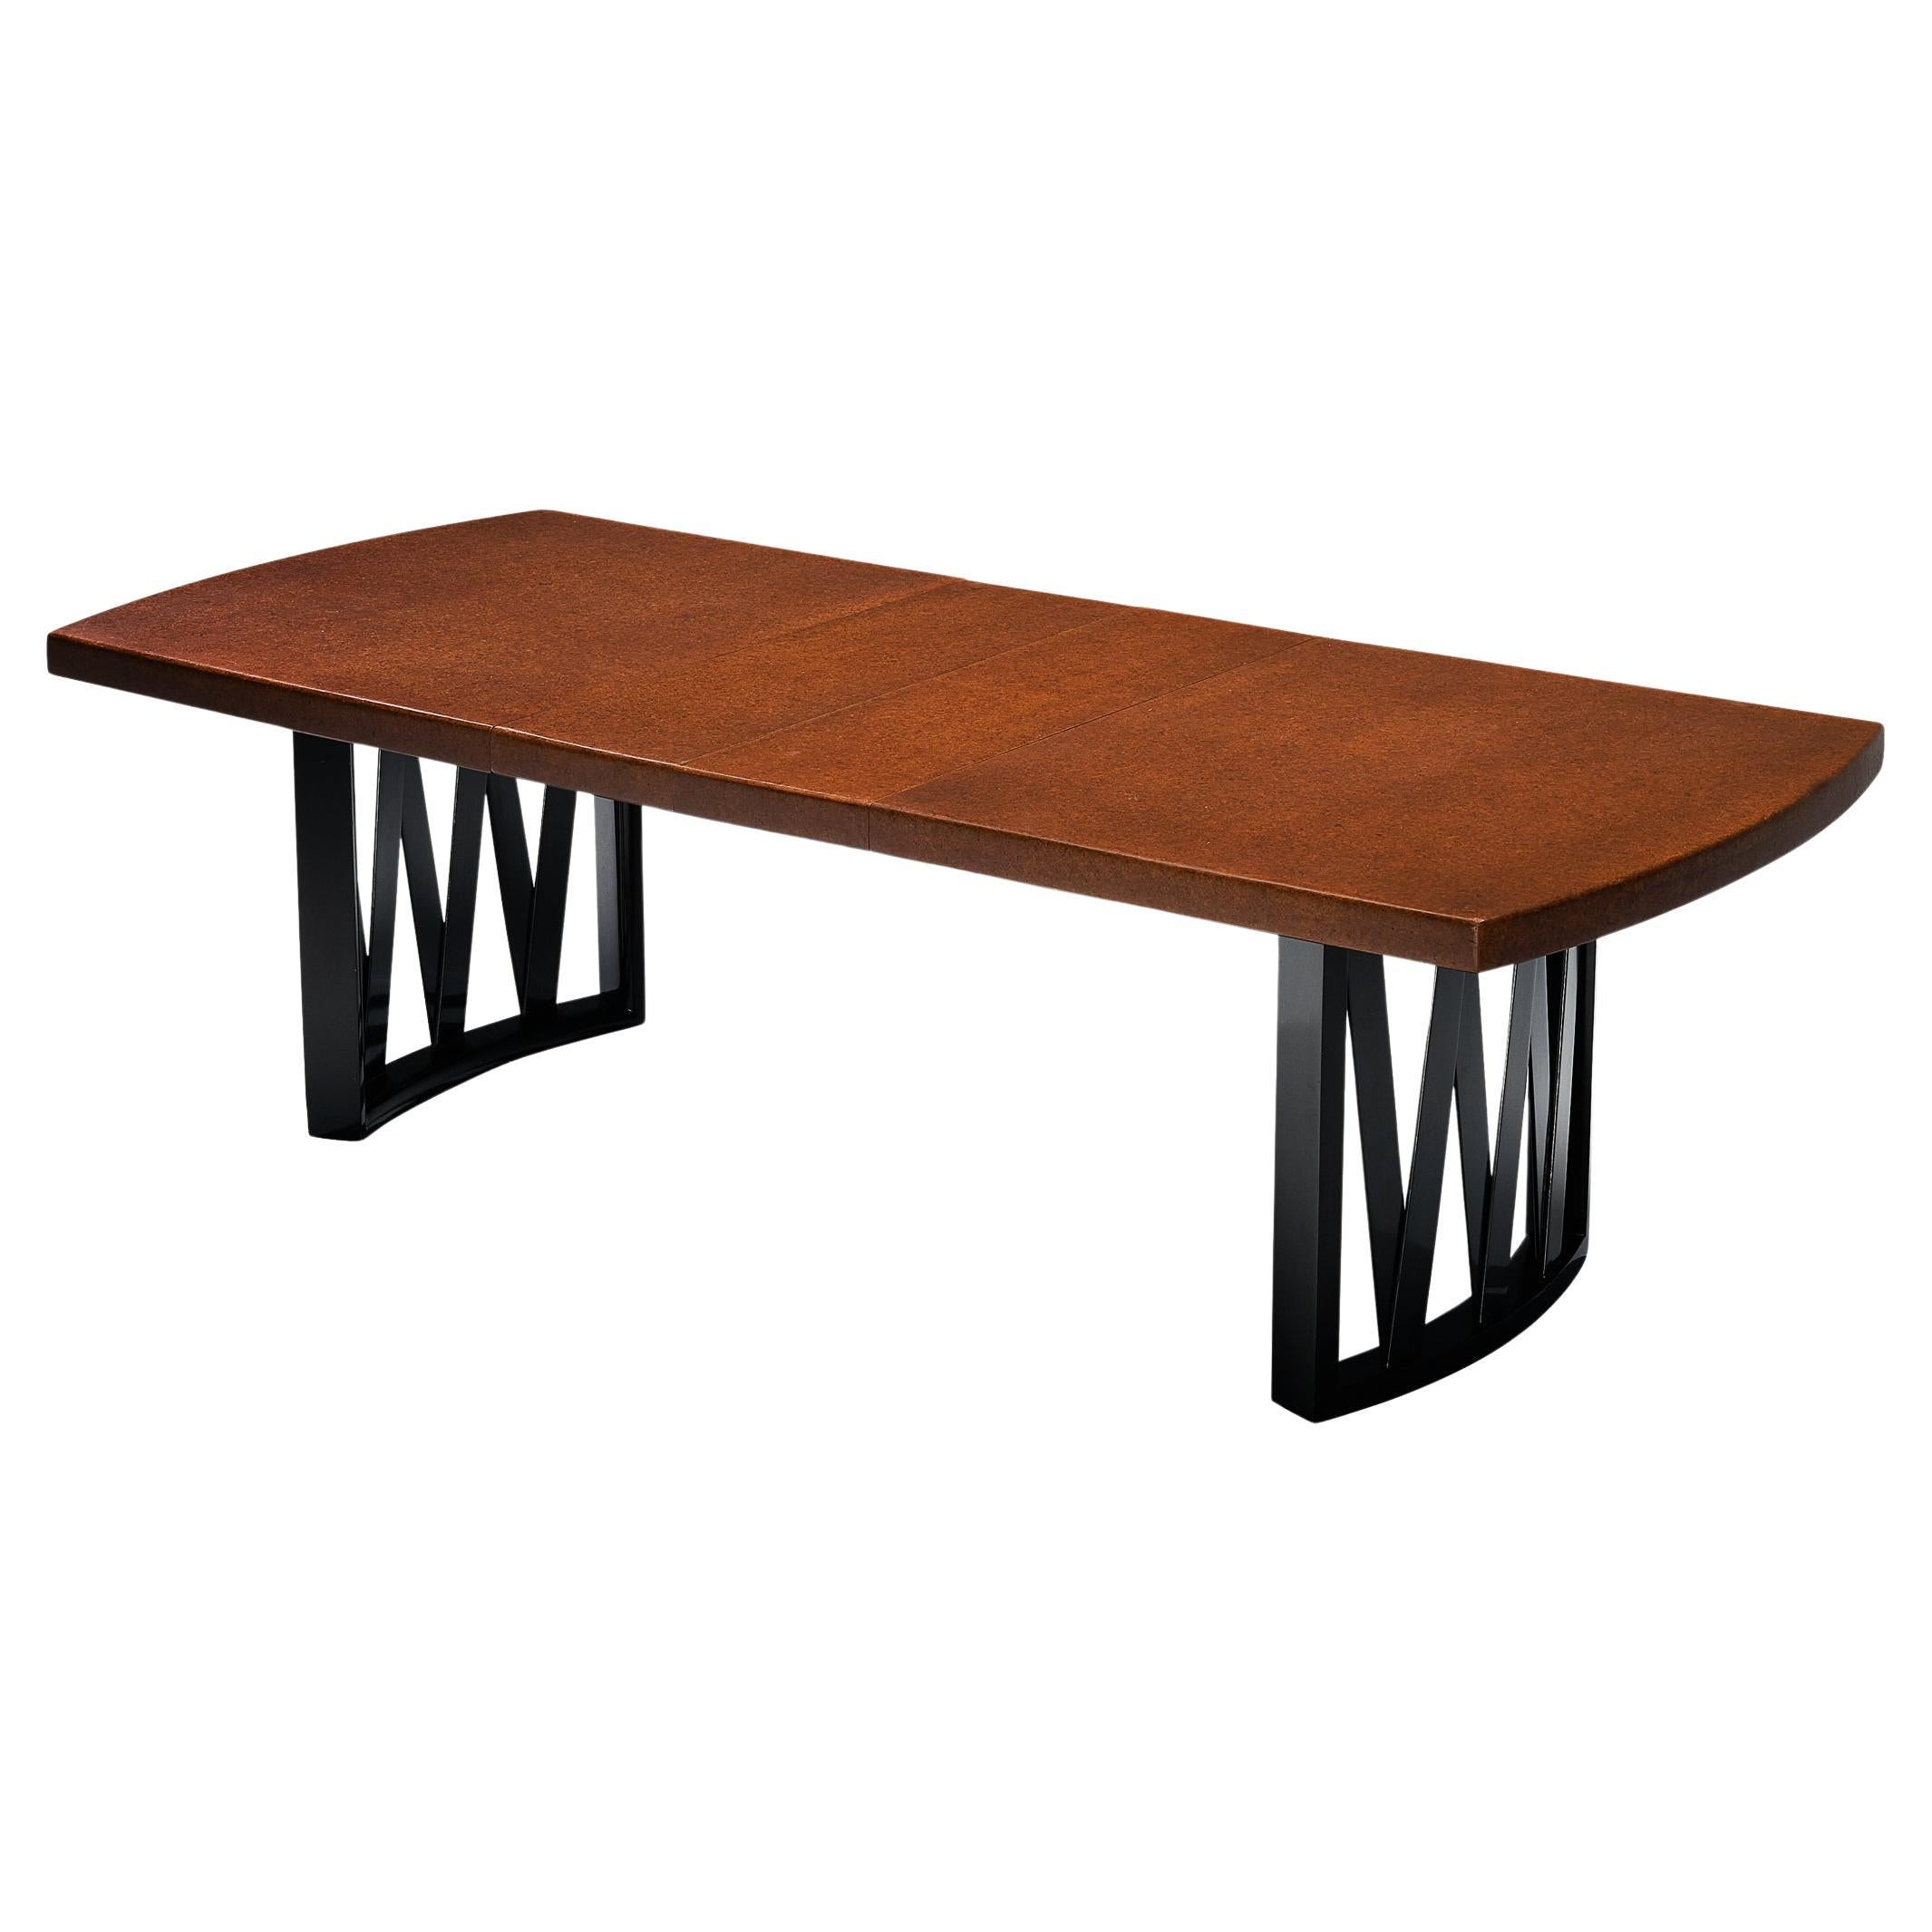  Johnson Furniture Company Dining Room Tables